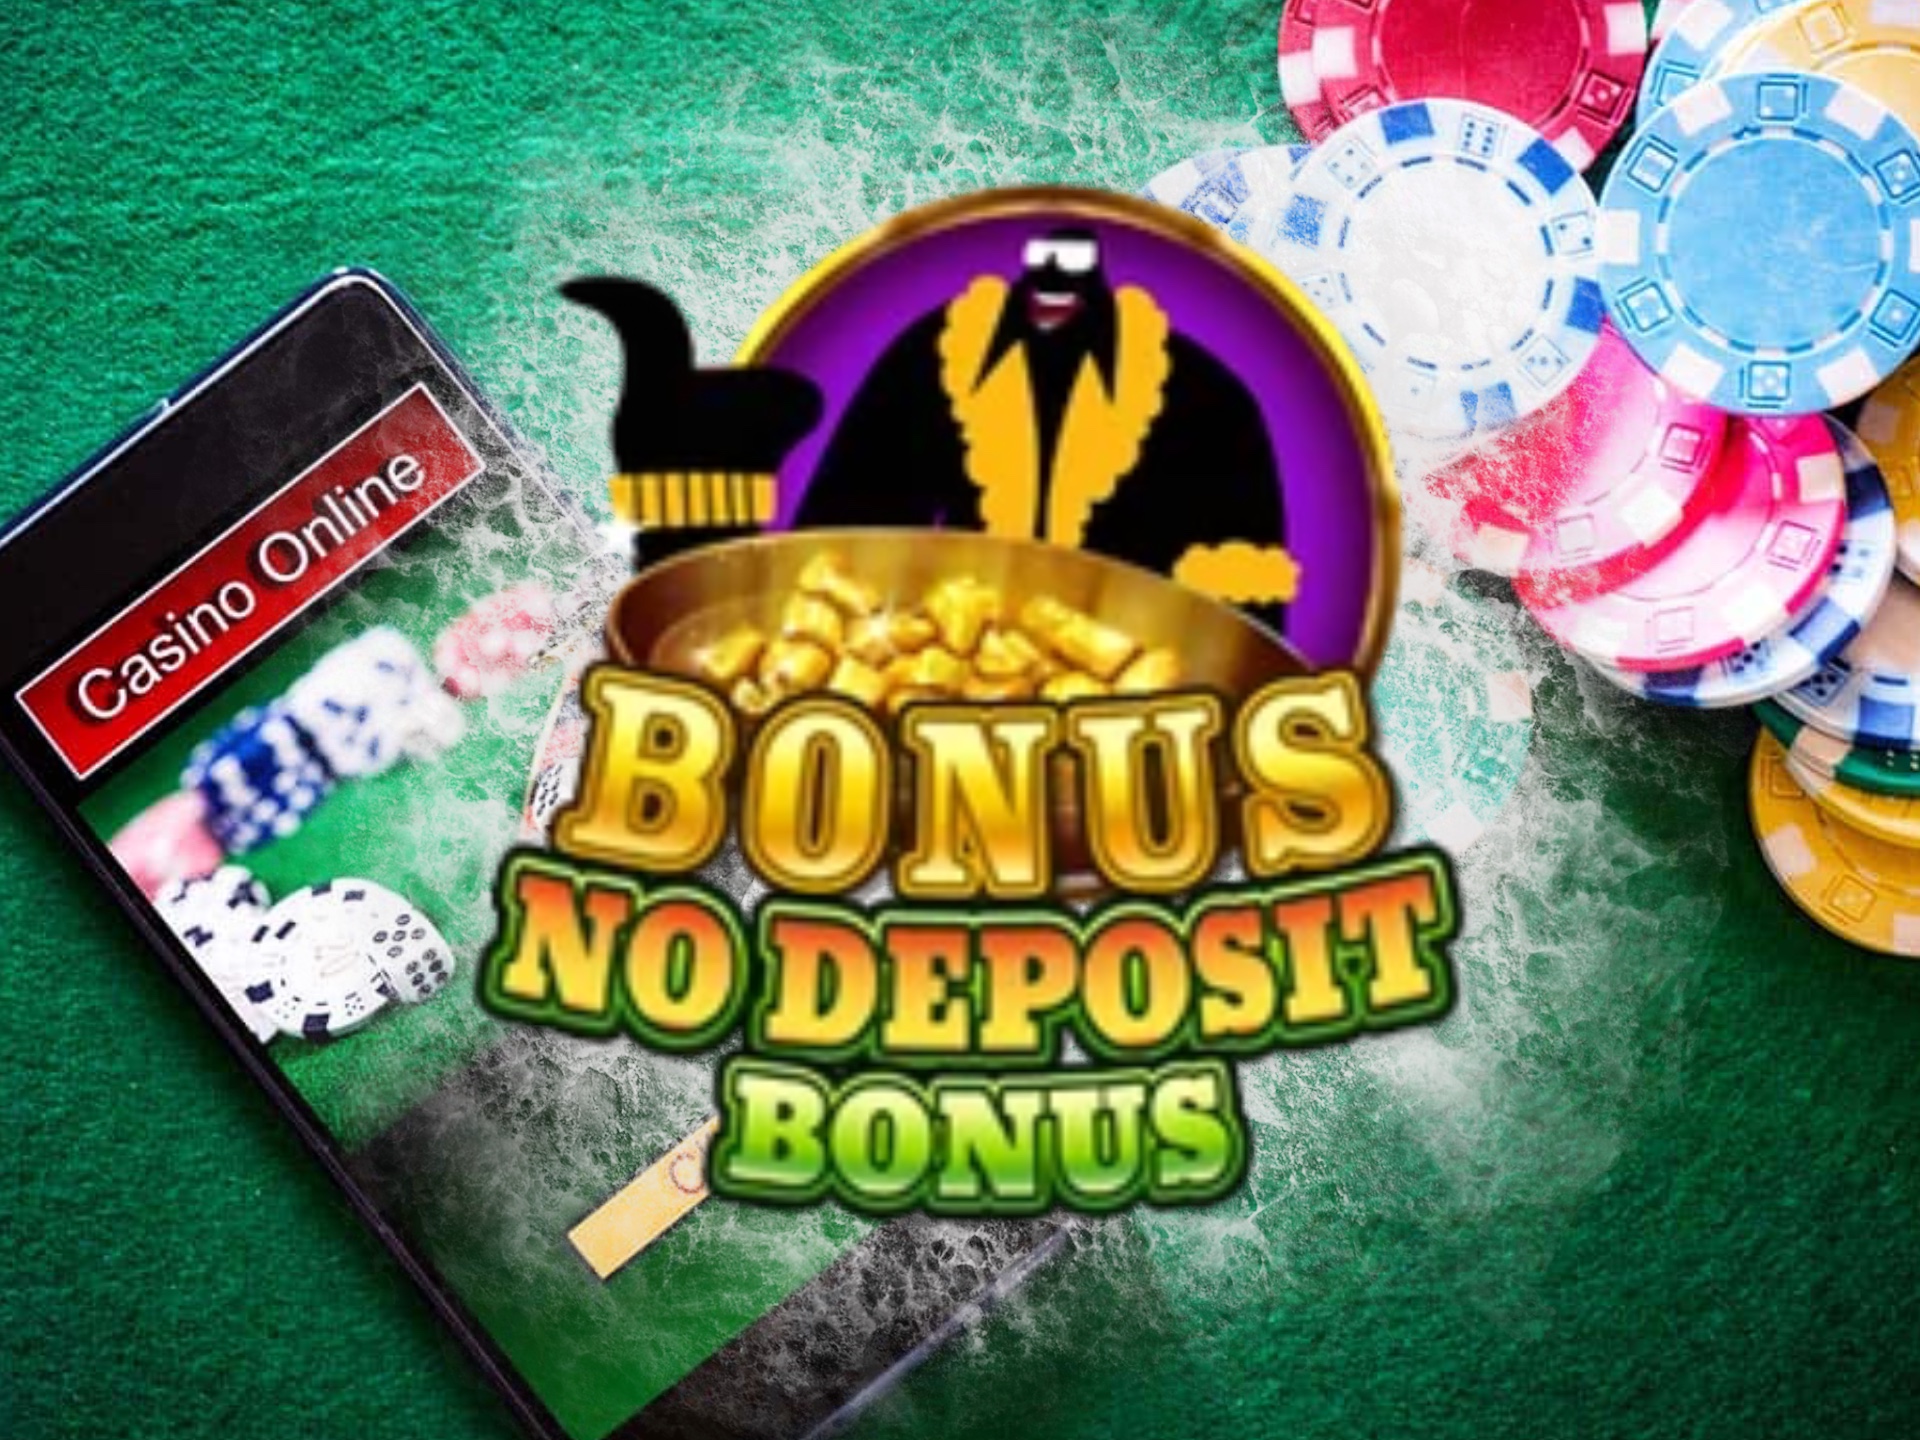 You don't have to deposit any money to an online casino to get the bonus.